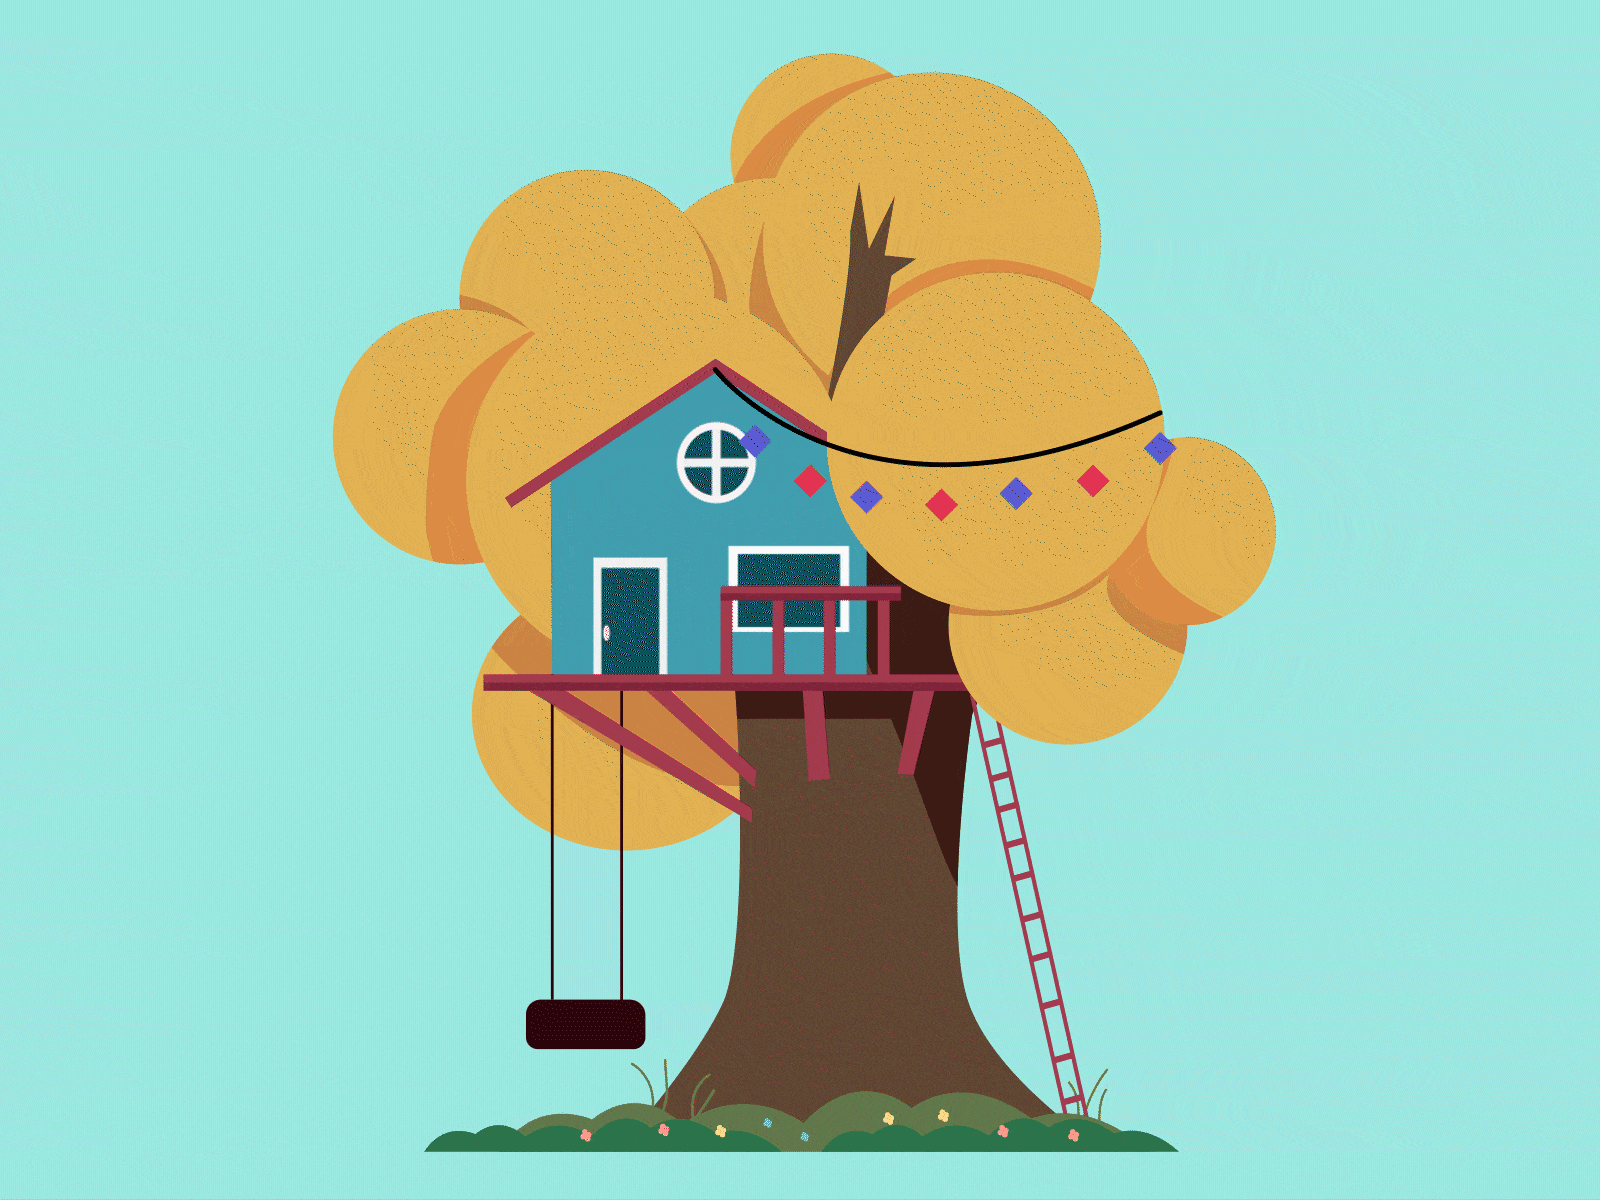 Treehouse aftereffects animated gif animation animation 2d art gif home house illustration illustrator illustrator design quarantine tree treehouse